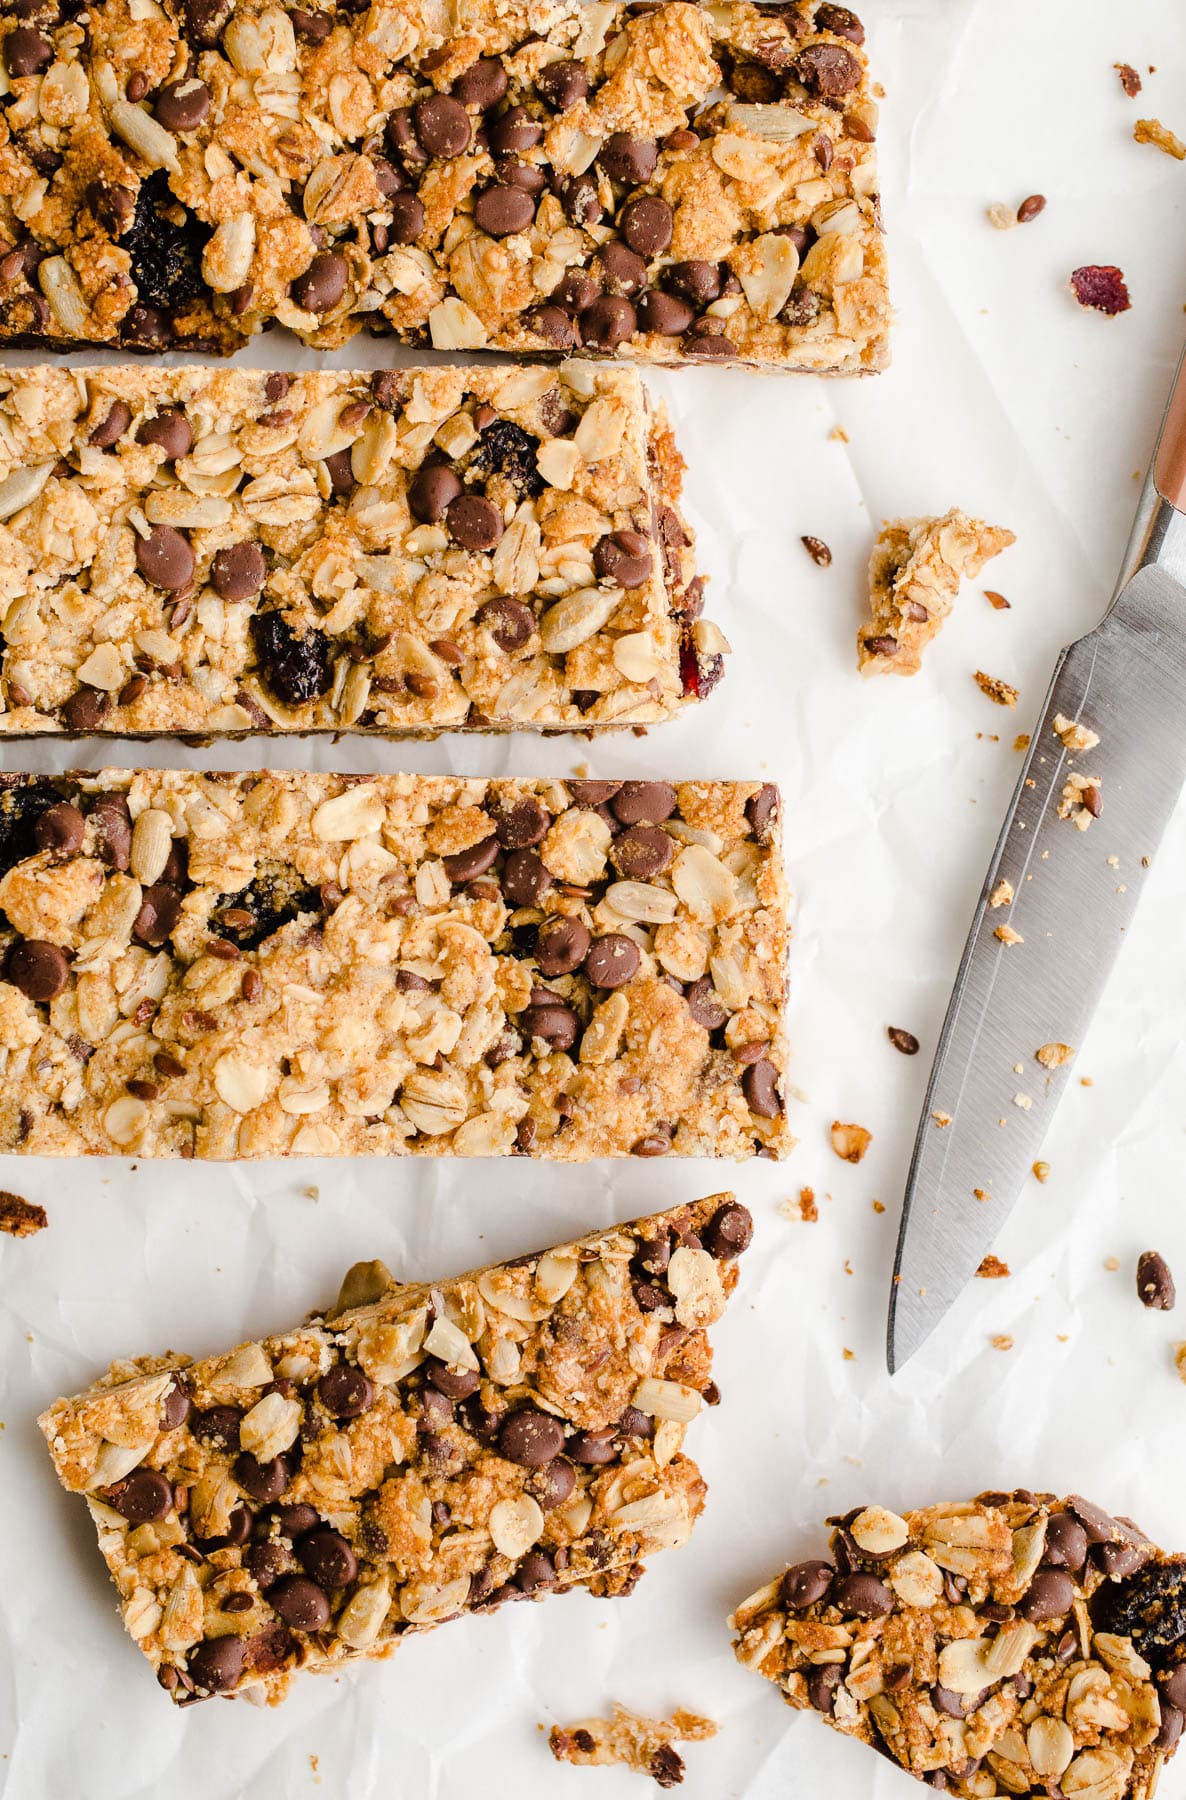 Freshly cut homemade granola bars on white parchment.